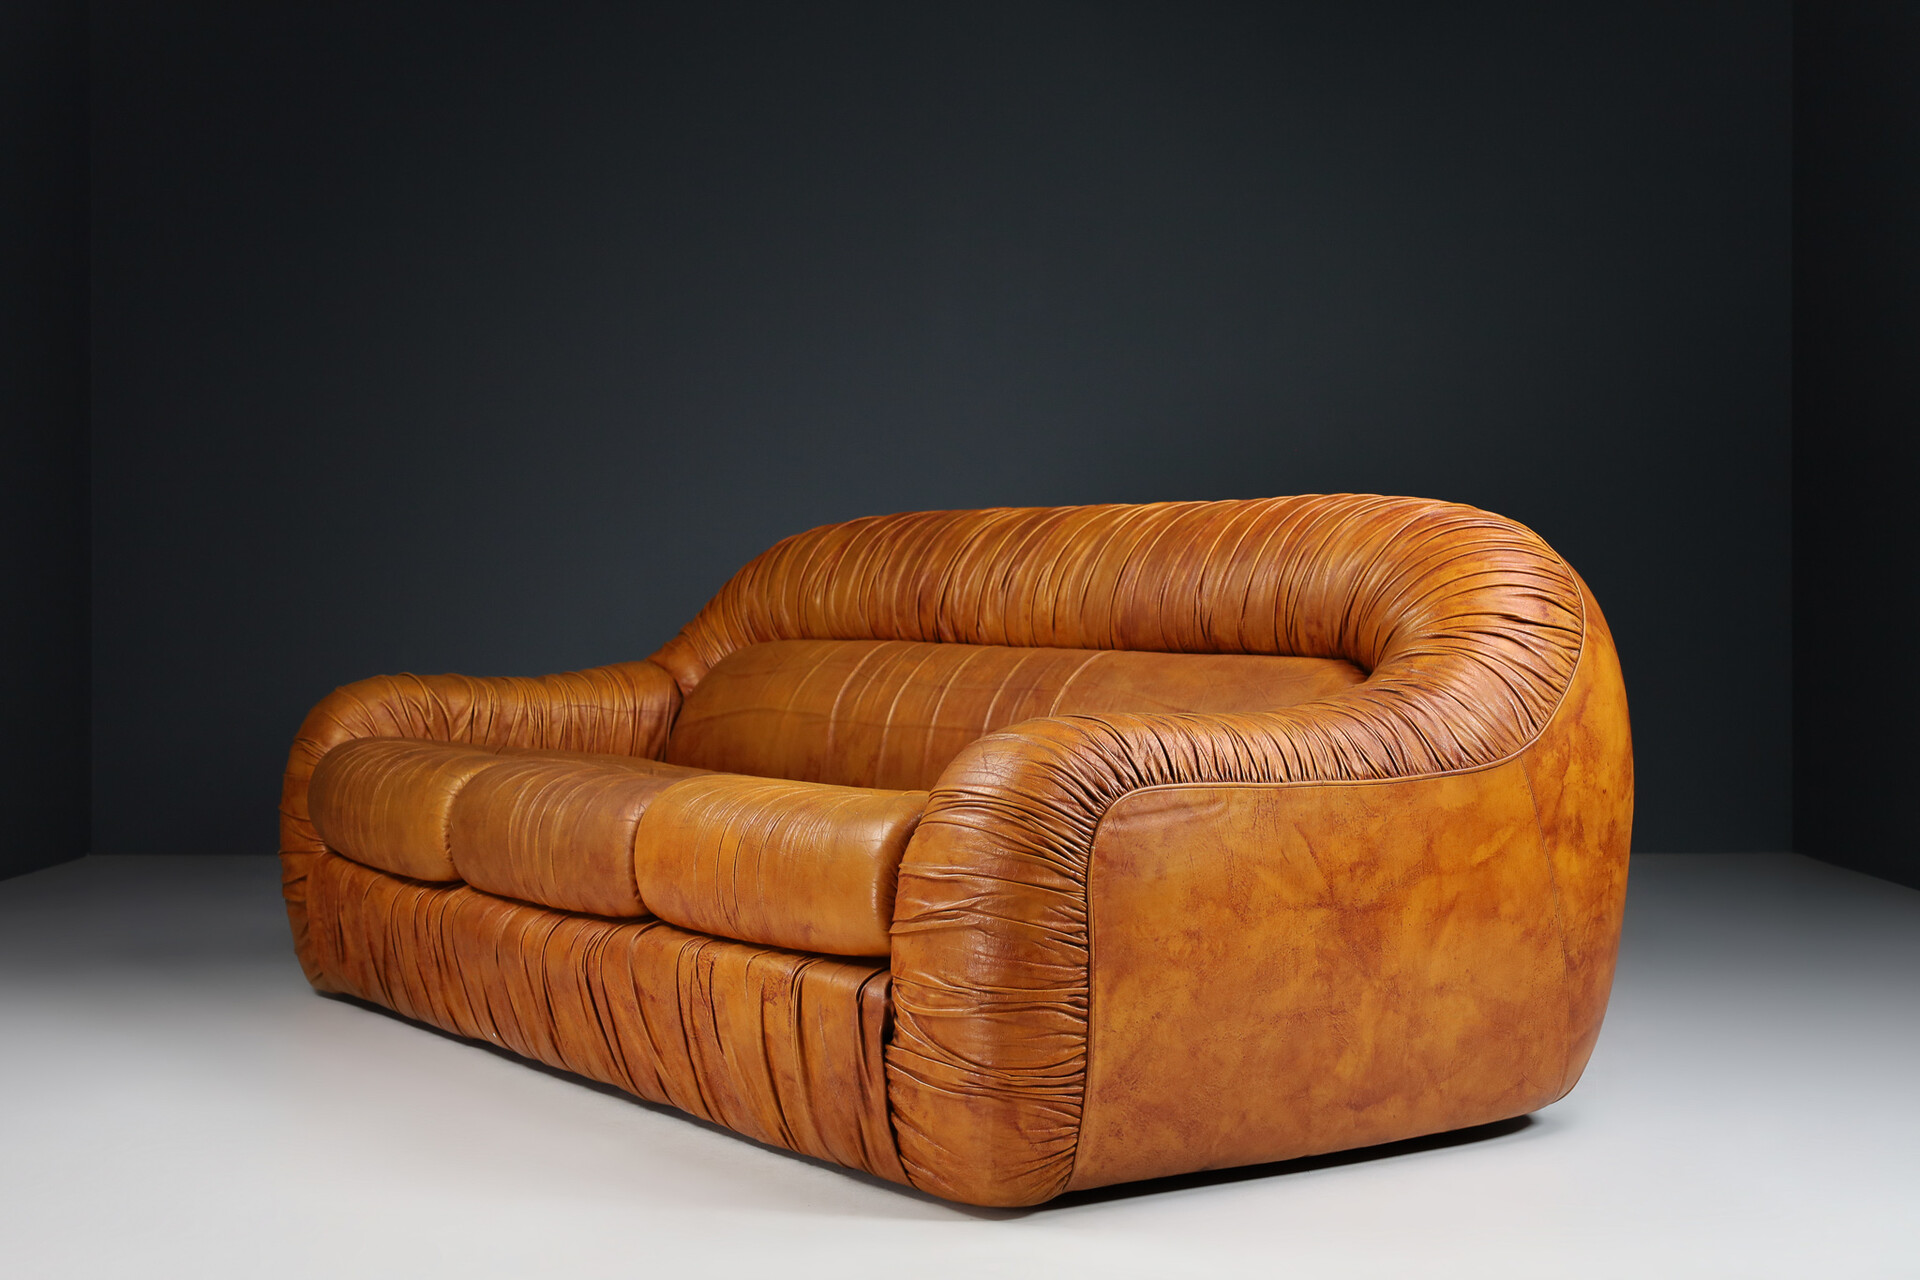 1970s original Benches modern \'Capriccio\' George model and Davidowski - sofa - Bighinello Eurosalotto, - in for designed Seating century century Late-20th Mid Sofas by brown Lounge Italy leather,